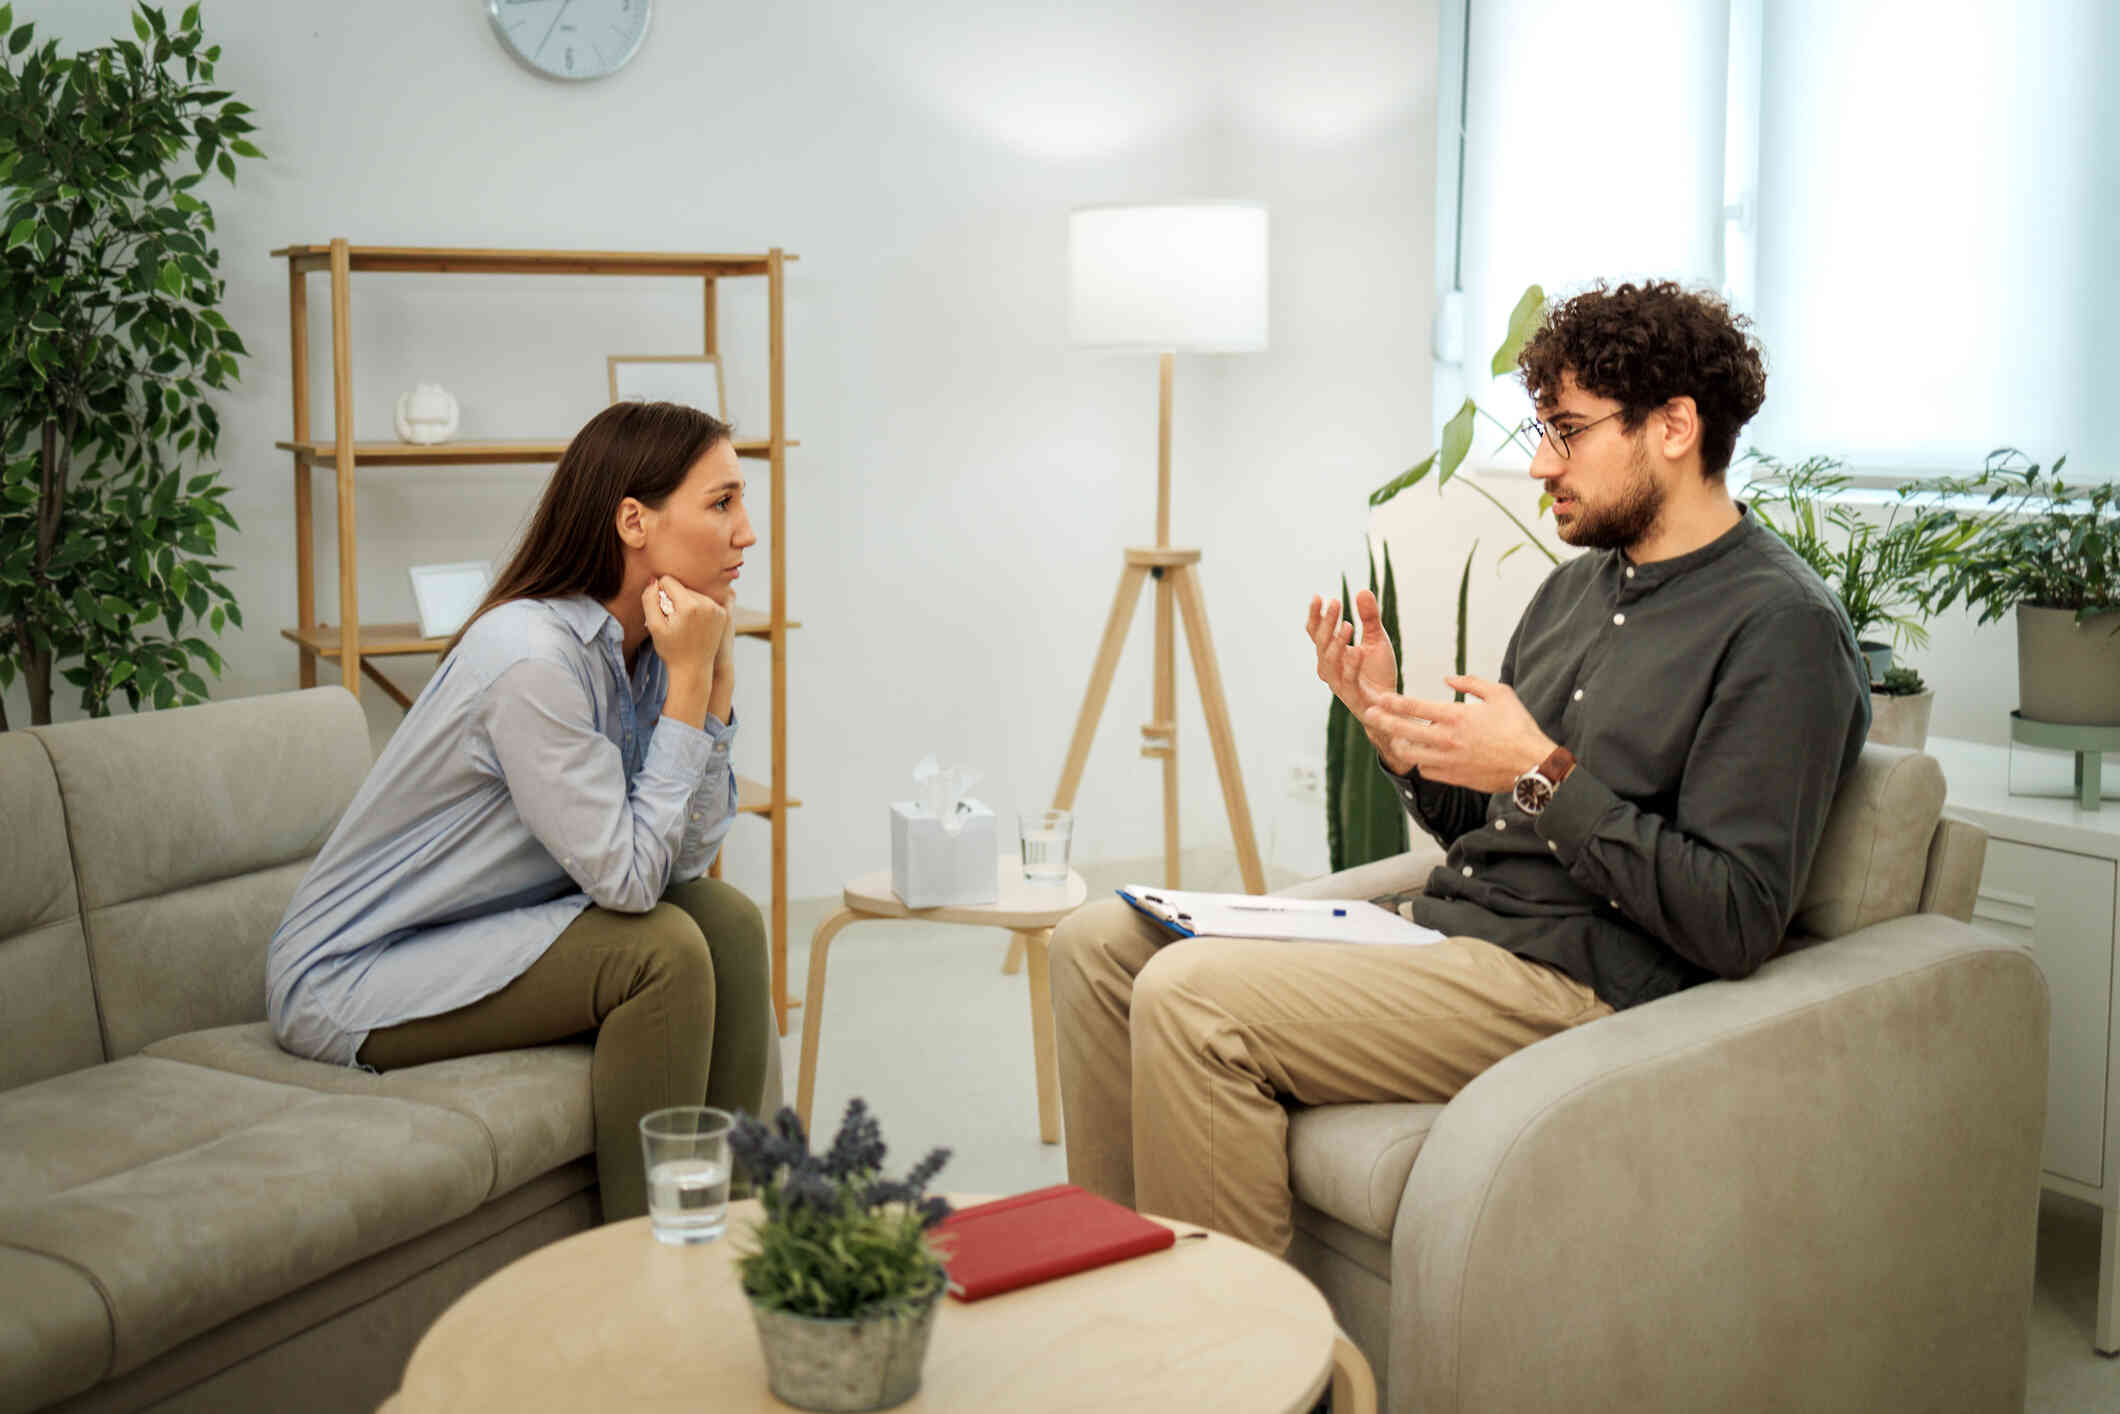 A woman leans forward on the couch in her therapists office and listens intently as her male therapist talks during a therapy session.